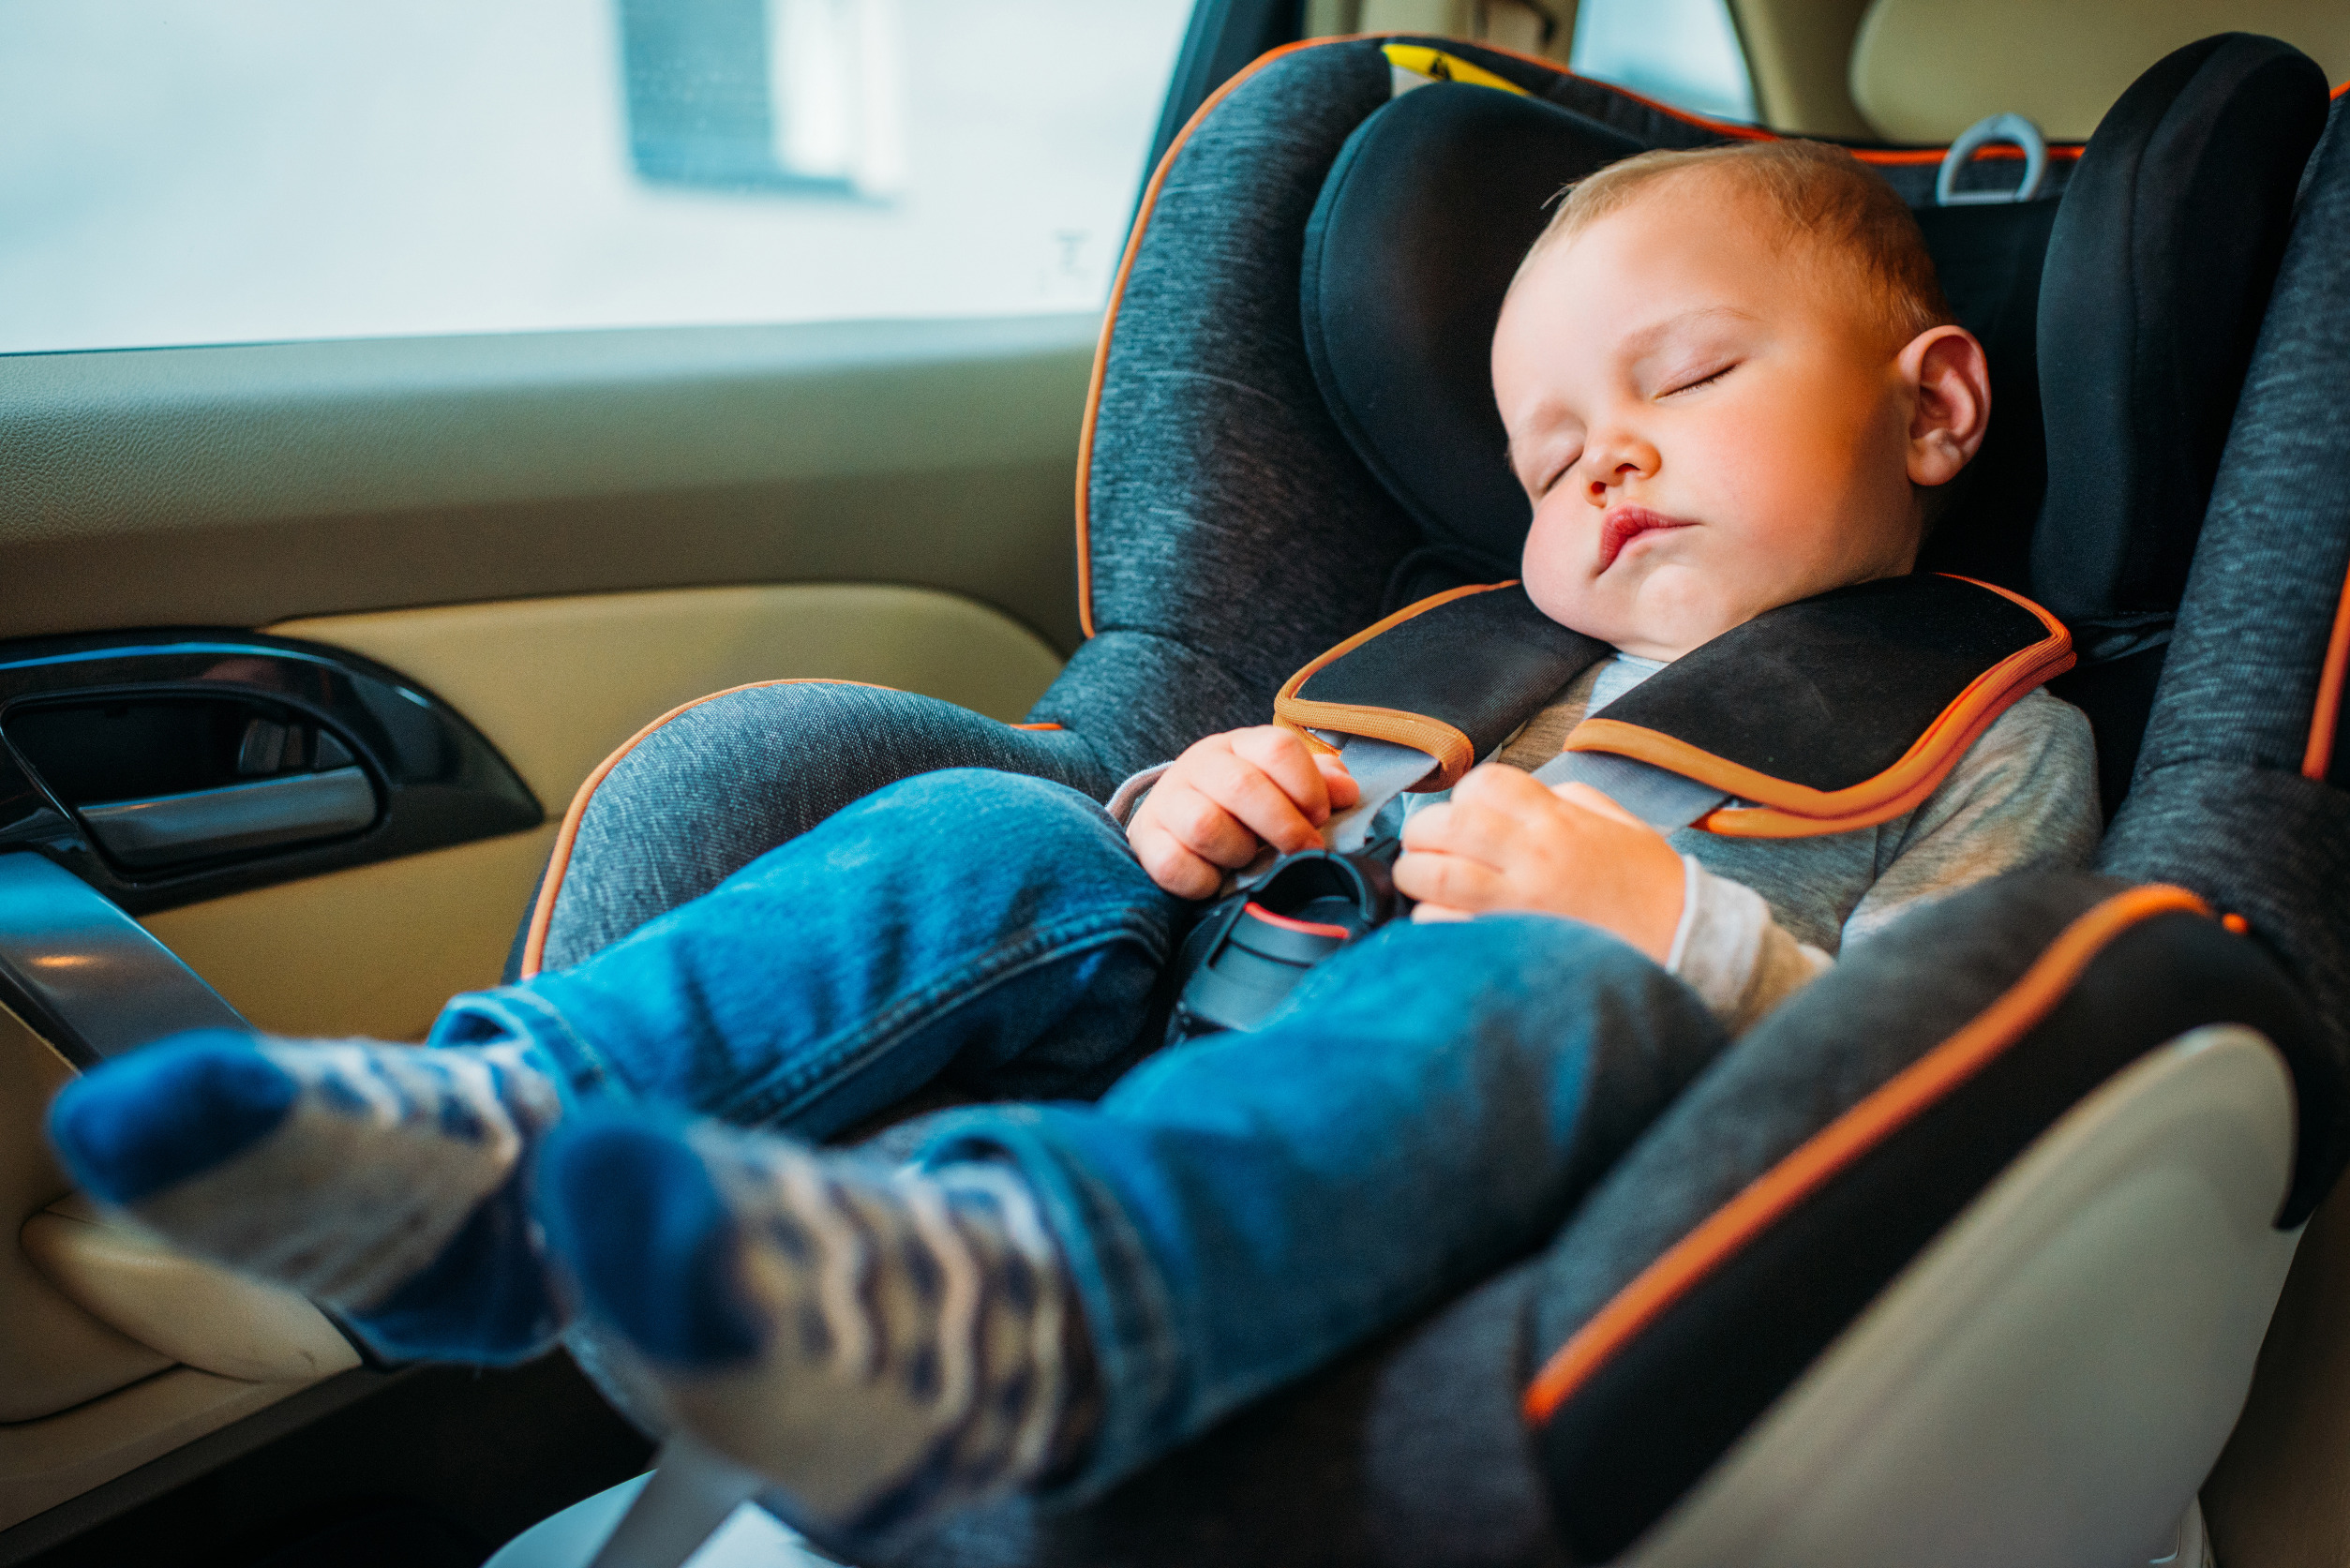 An image showing a child properly secured in a car seat, in accordance with Michigan car seat laws as recommended by the American Academy of Pediatrics.